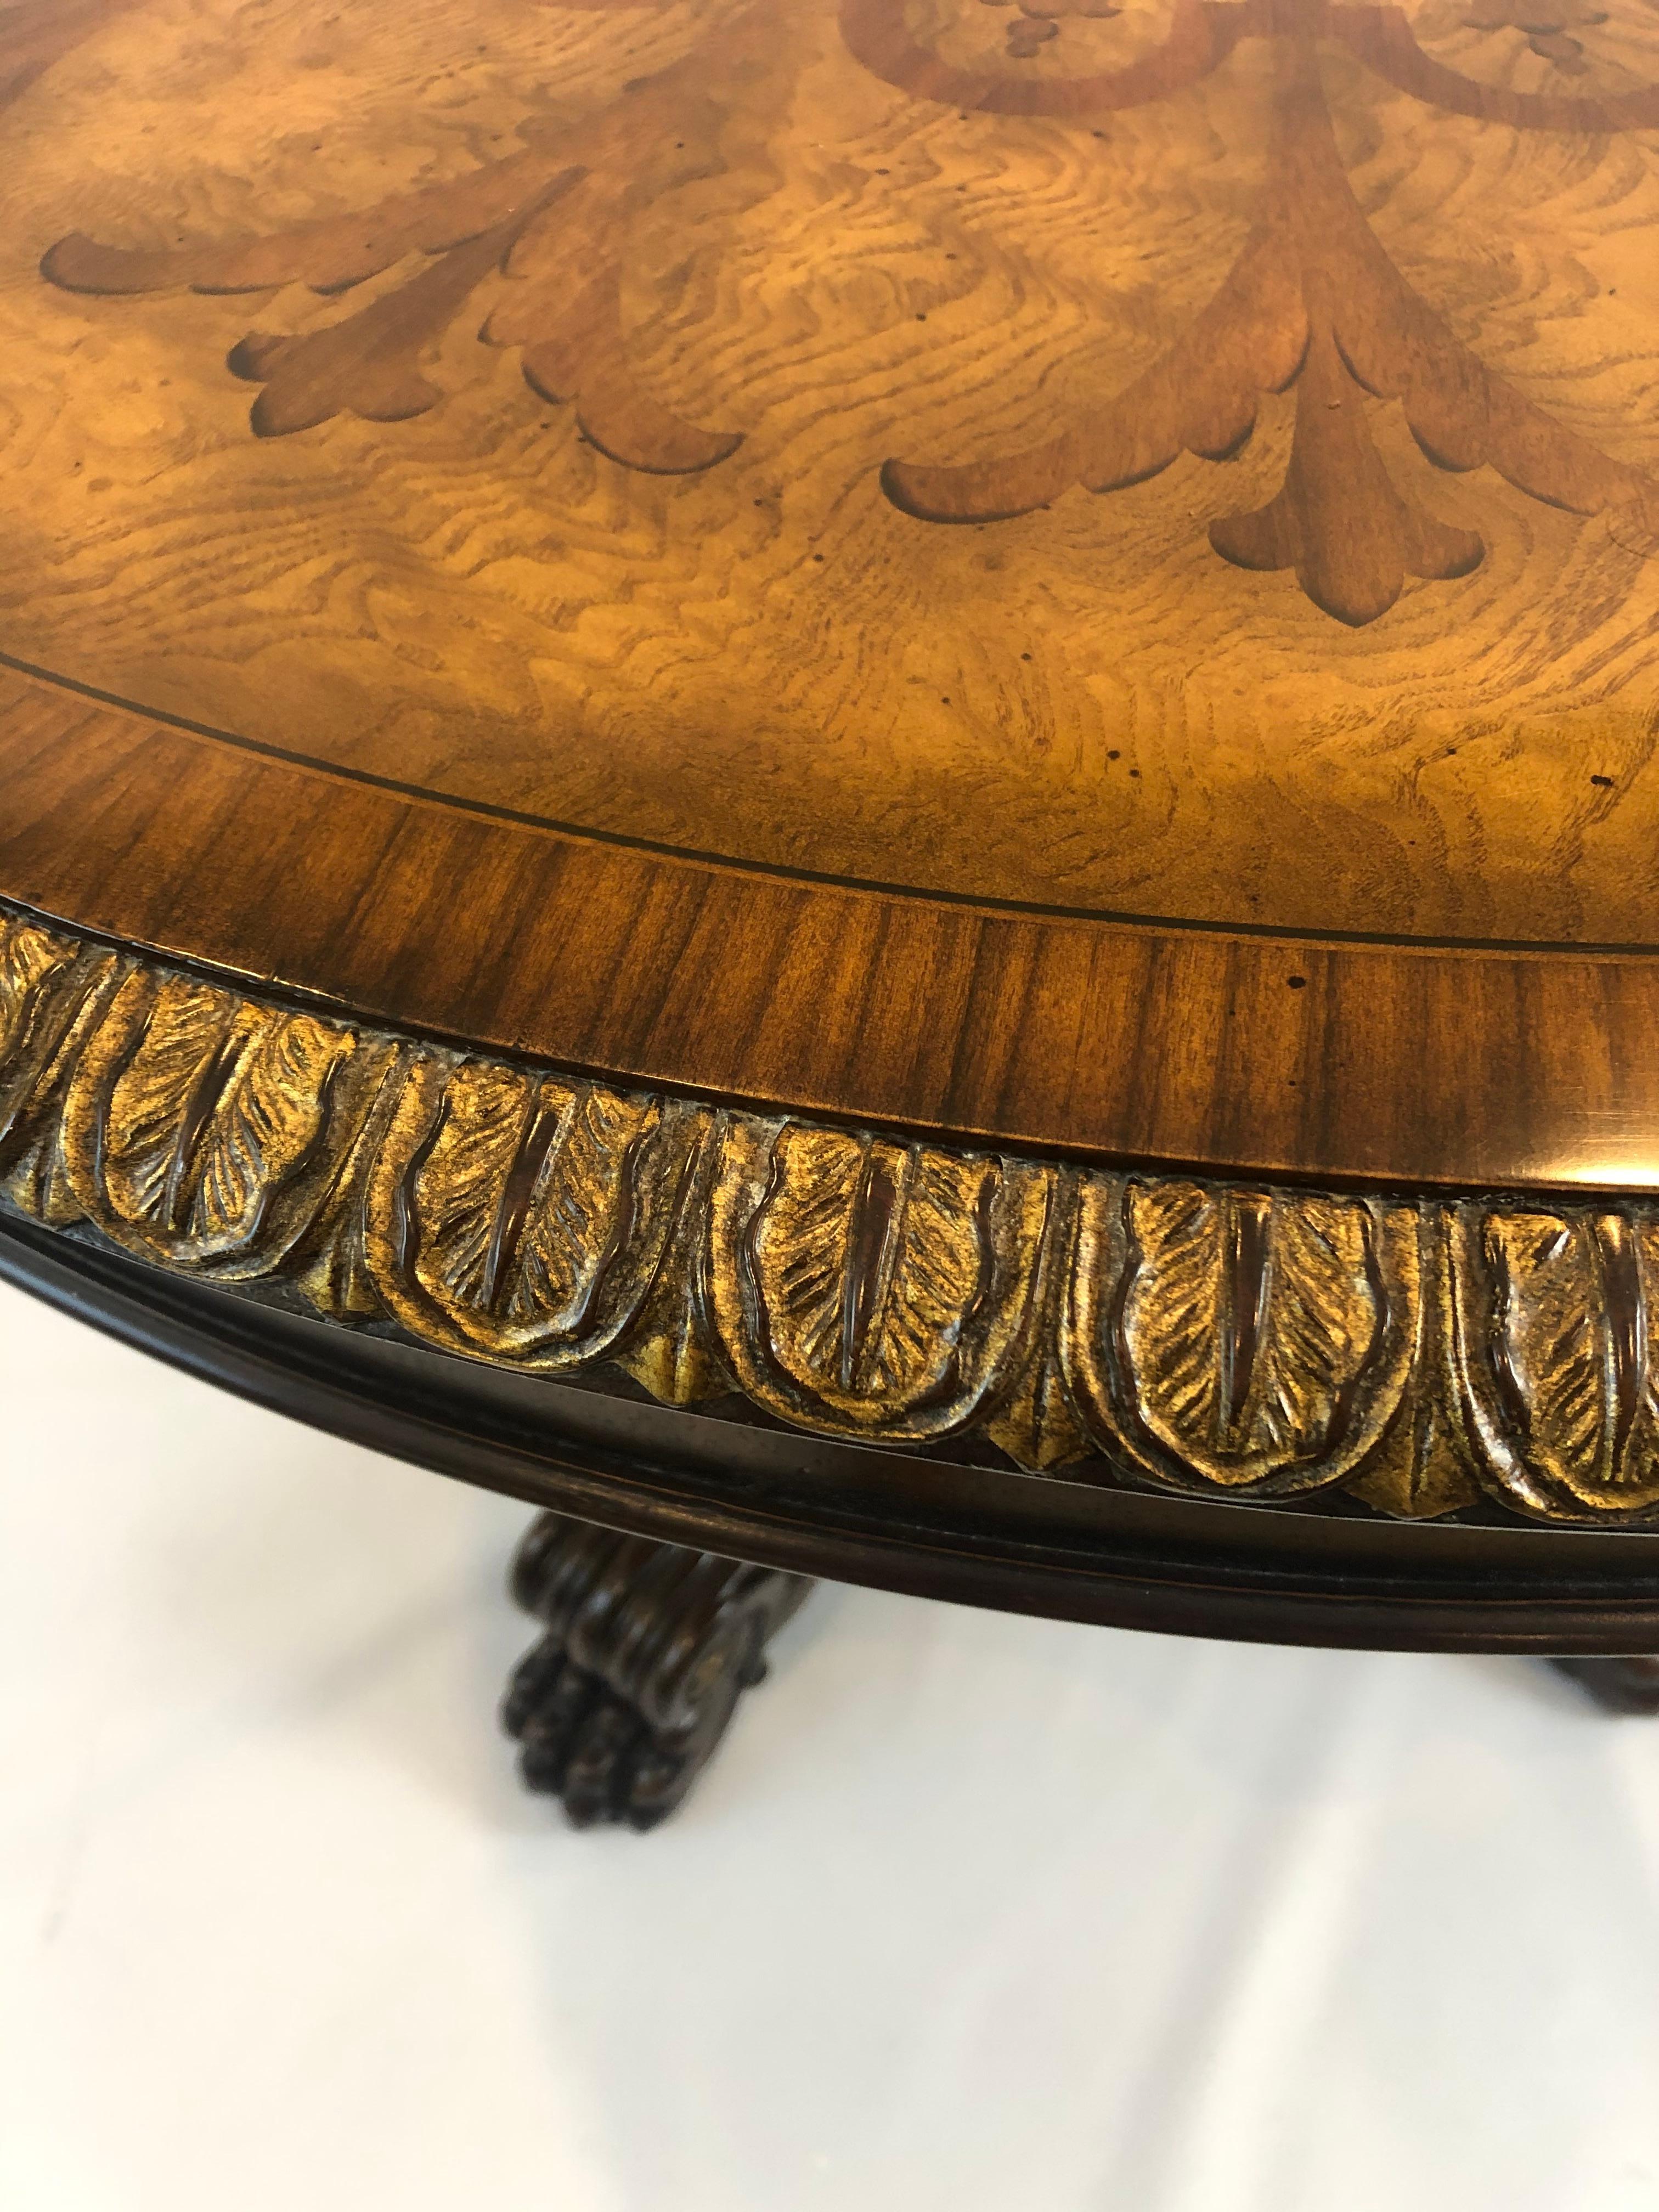 Inlay Ornate Inlaid Round Center Table with Gilt Decoration by Maitland Smith